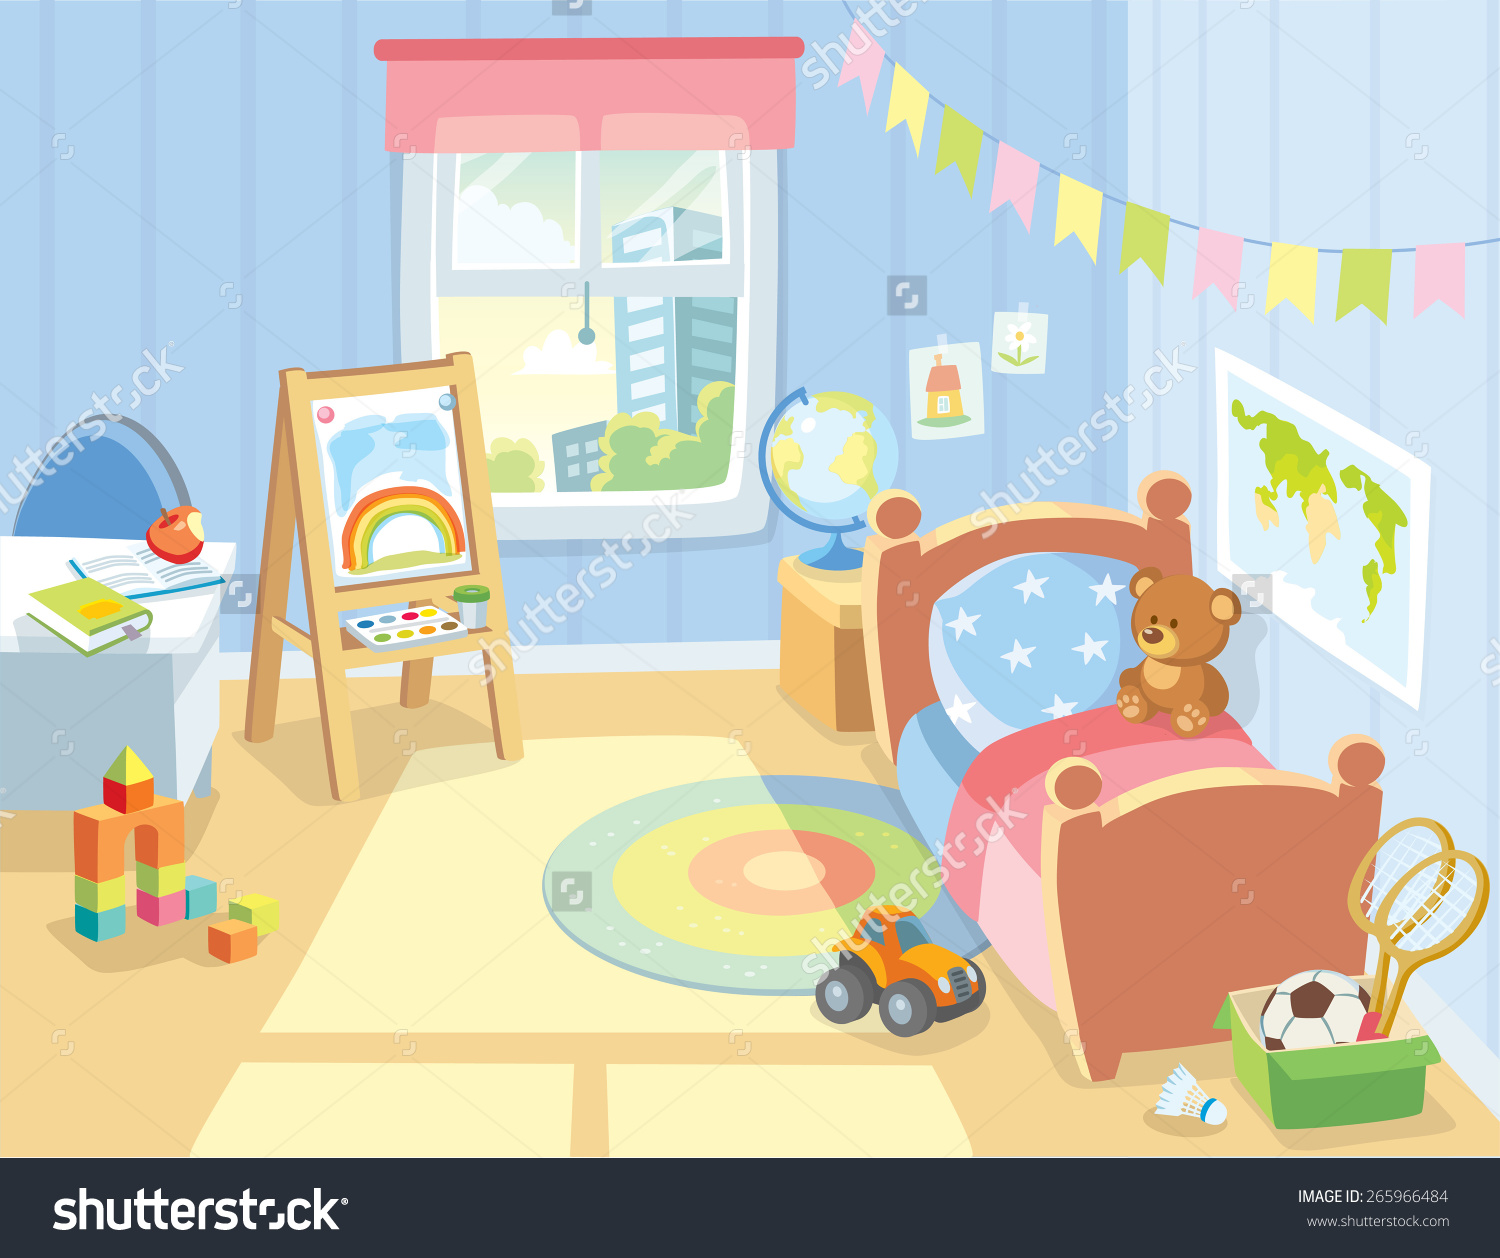 furniture clipart child bed